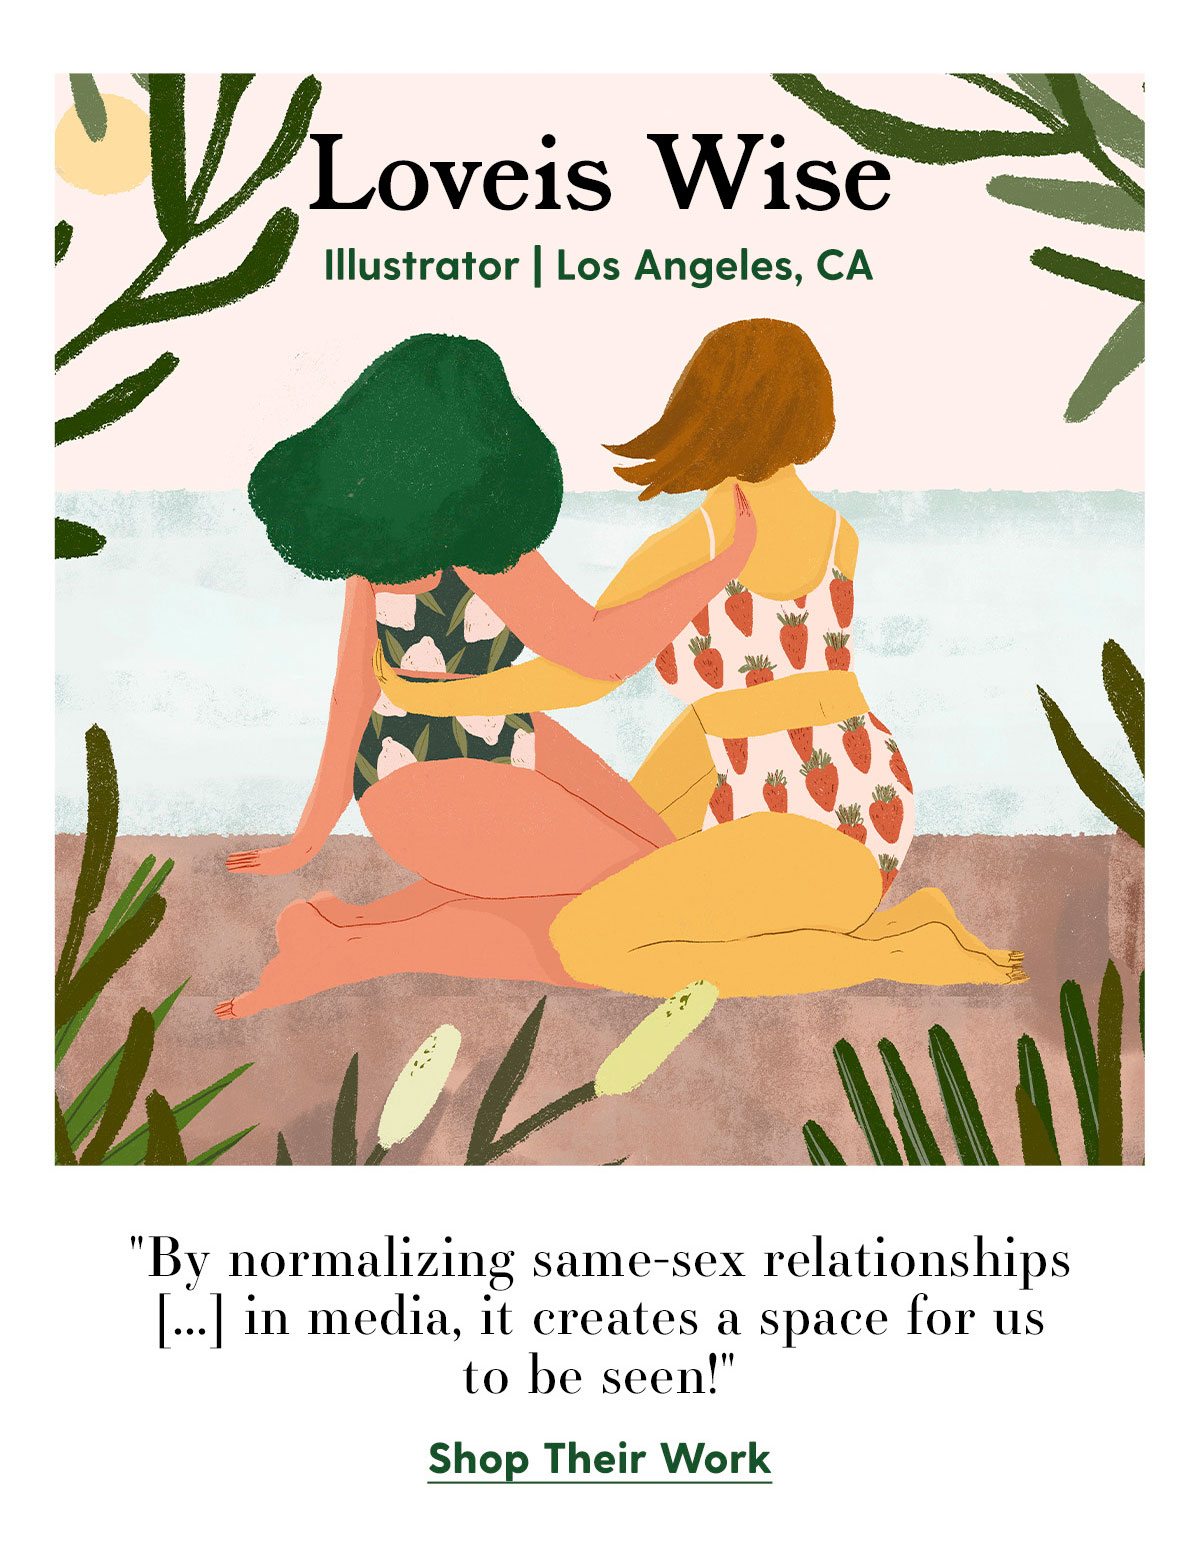 Loveis Wise - Illustrator | Los Angeles, CA. 'By normalizing same-sex relationships [...] in media, it creates a space for us to be seen!' Shop Their Work